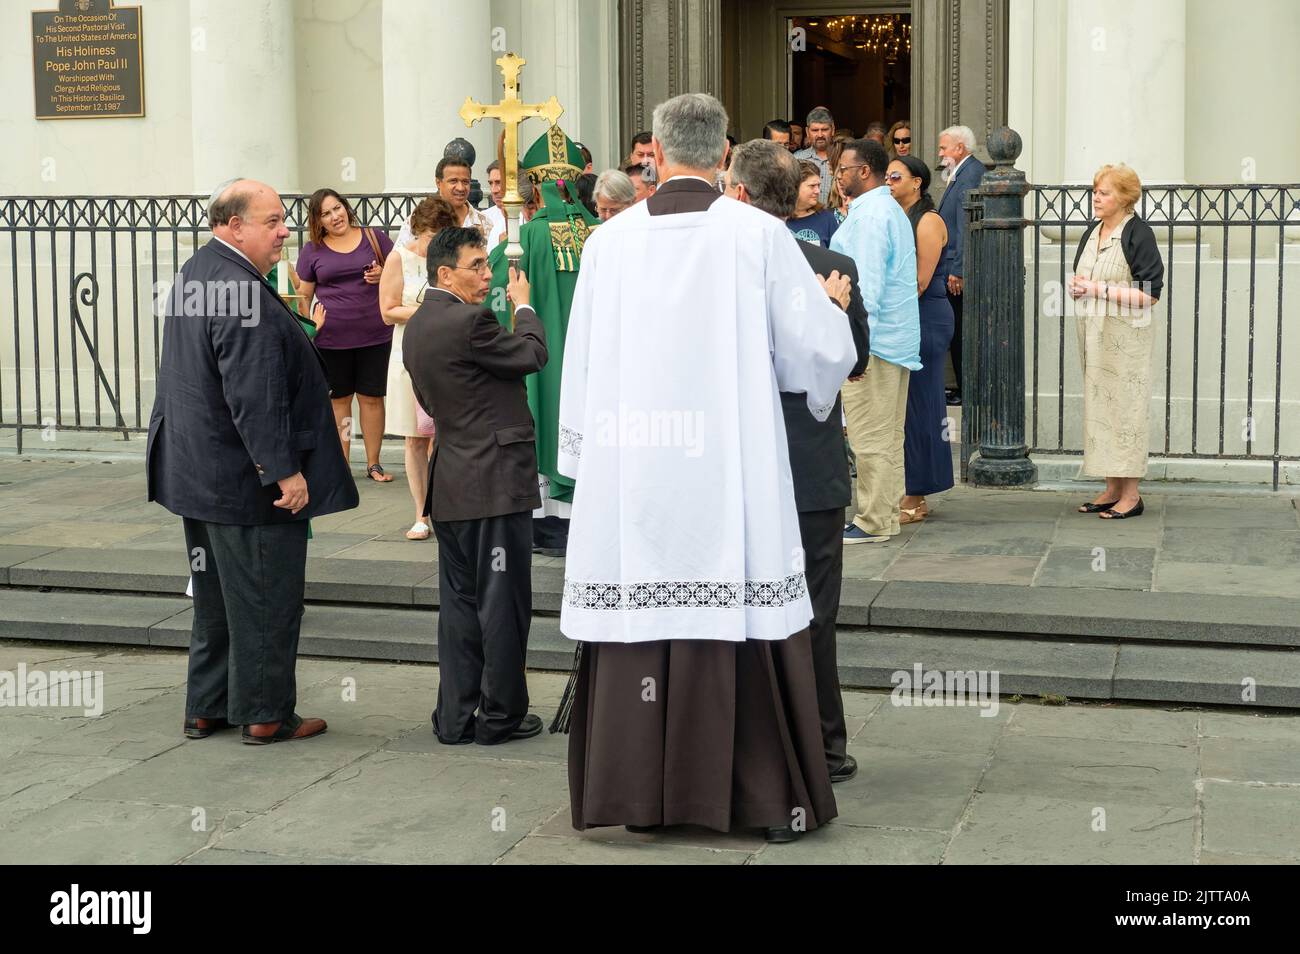 NEW ORLEANS, LA, USA - JULY 16, 2017: Bishop greets parishioners after mass outside St. Louis Cathedral in the French Quarter Stock Photo